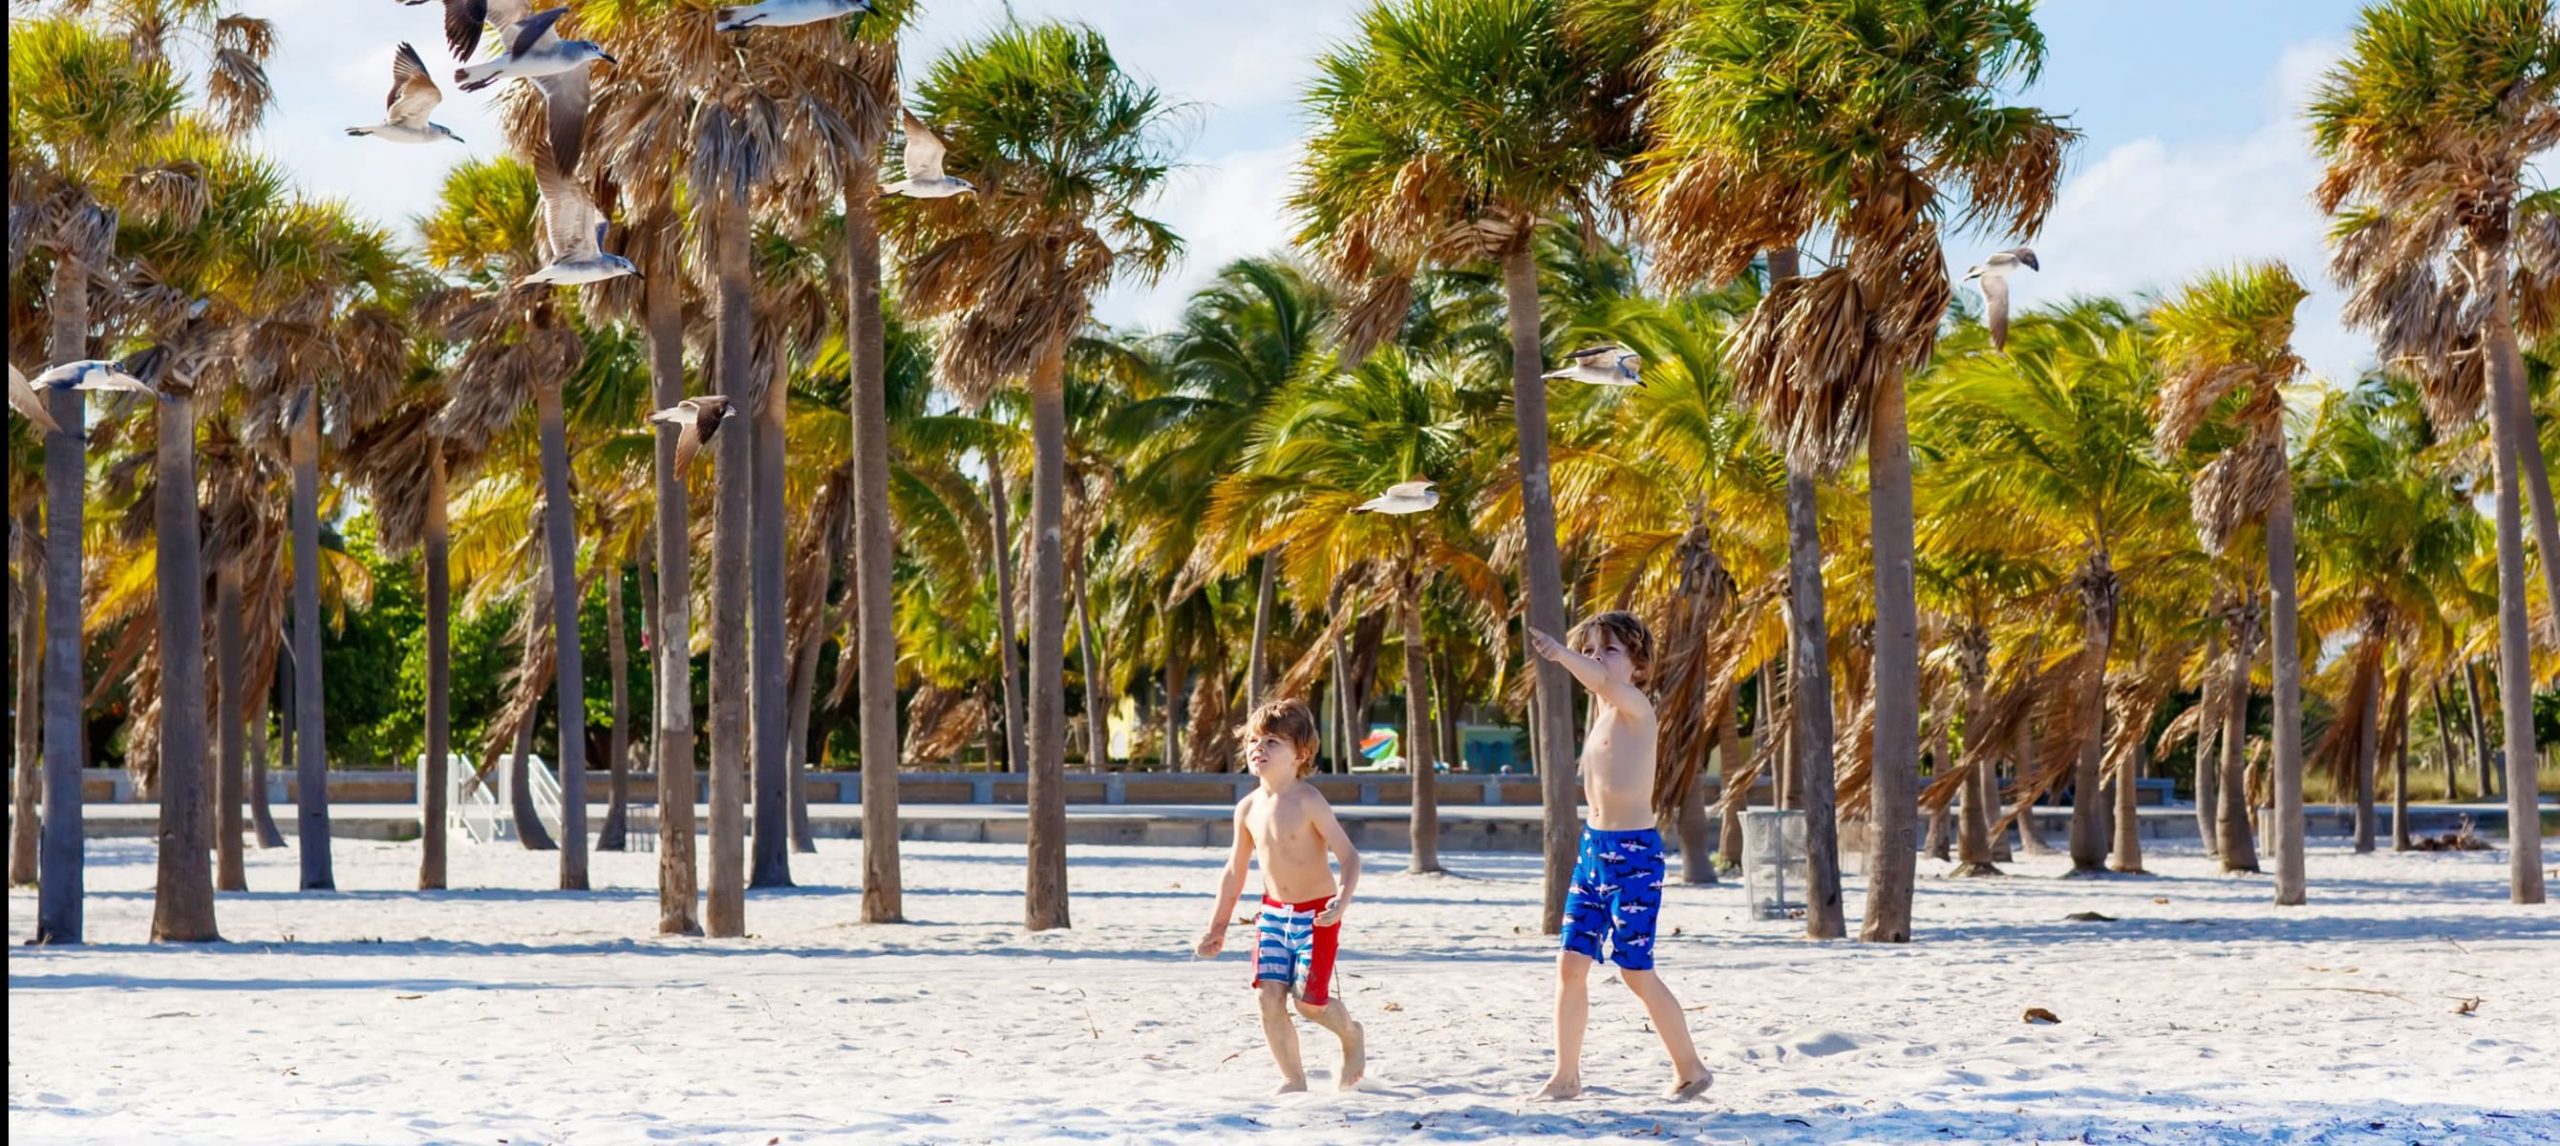 25 Amazing Things to Do in Miami With Kids